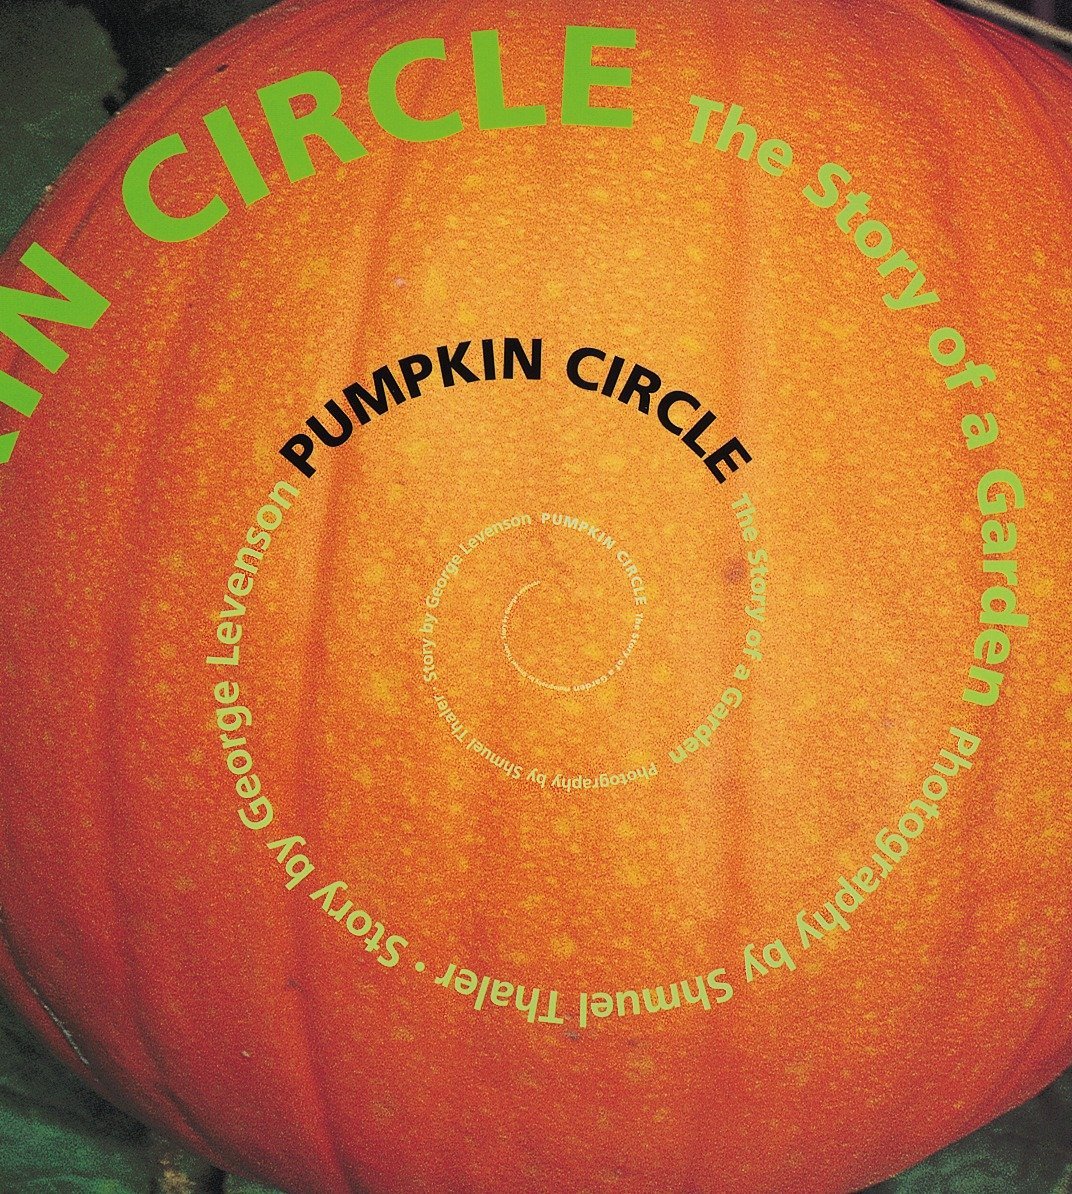 speech and language teaching concepts for Pumpkin Circle in speech therapy​ ​